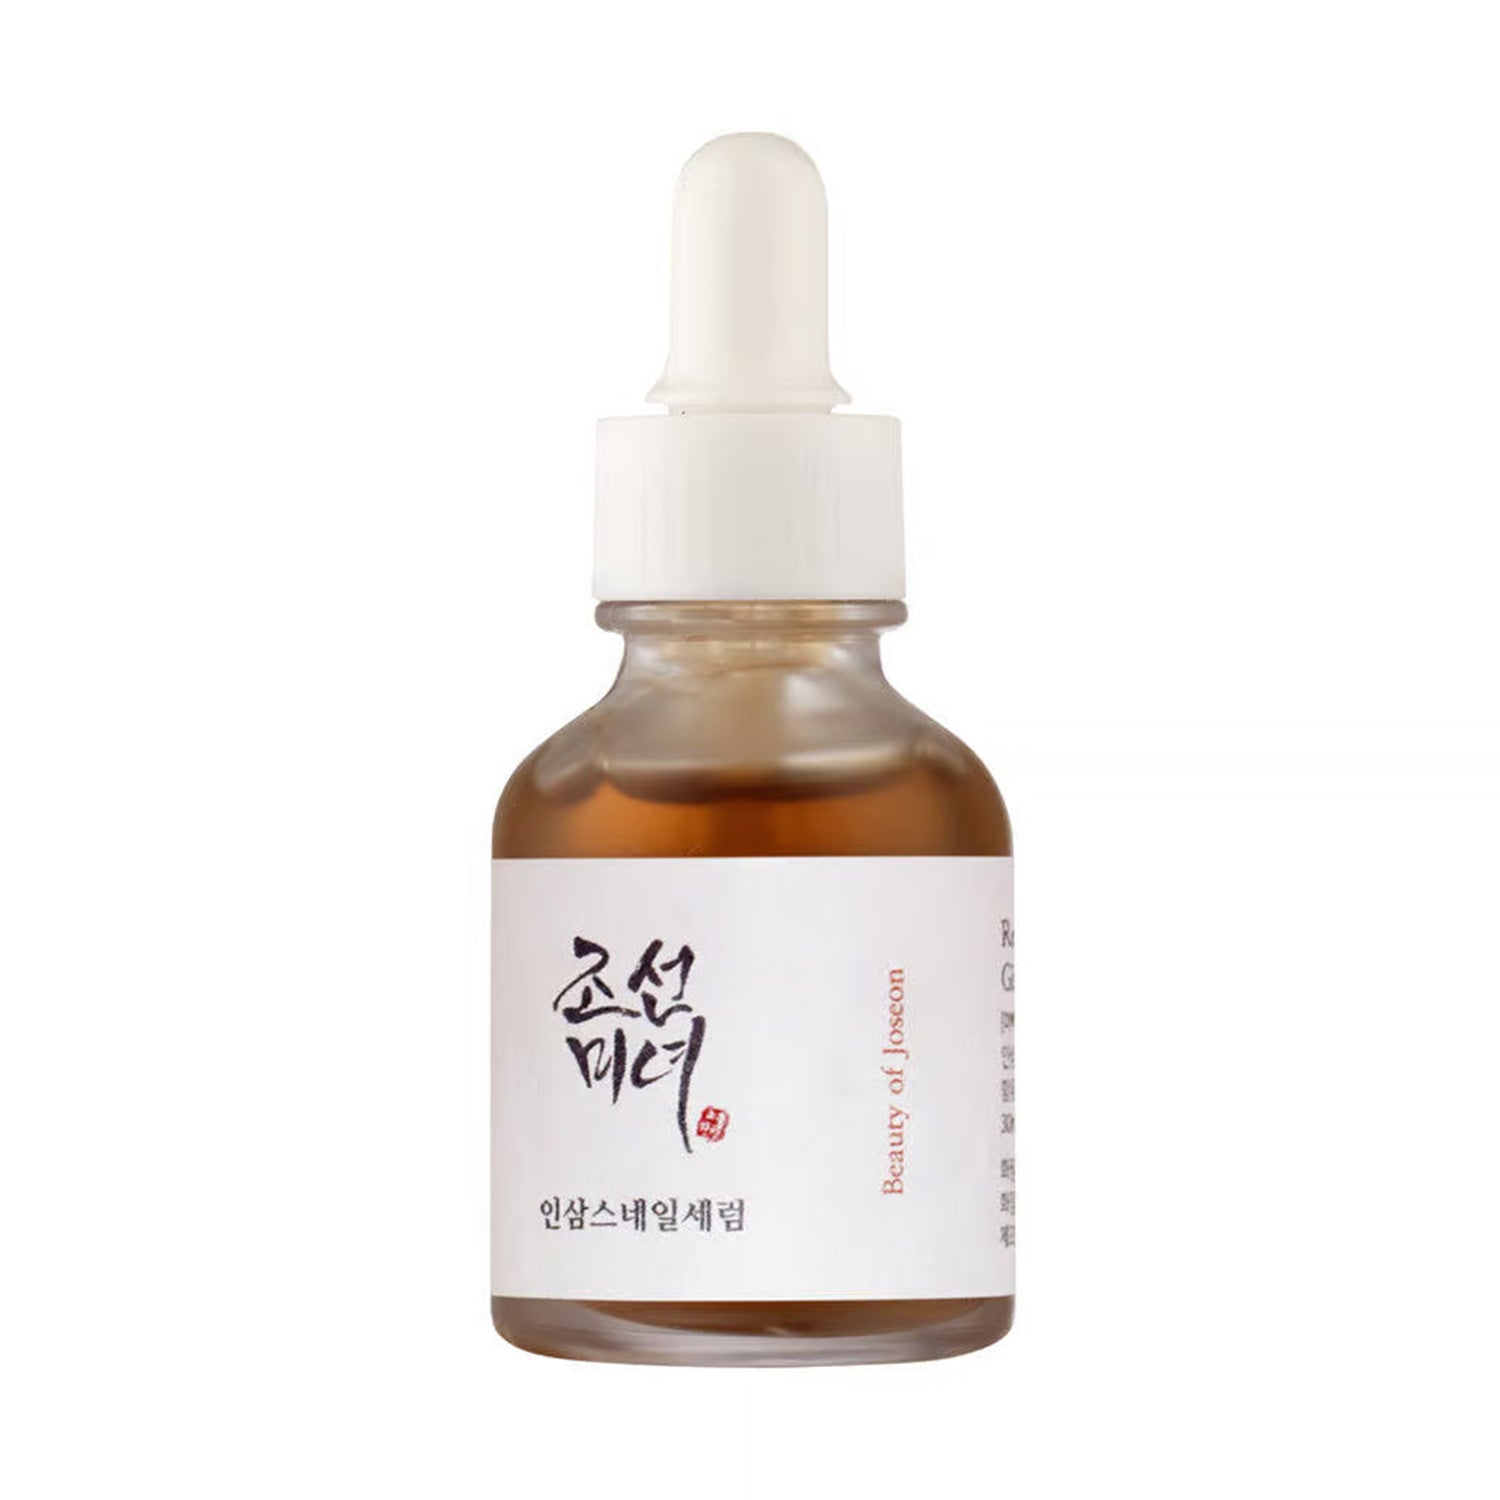 Beauty Of Joseon Revive Serum is made for skin that has lost its vitality.